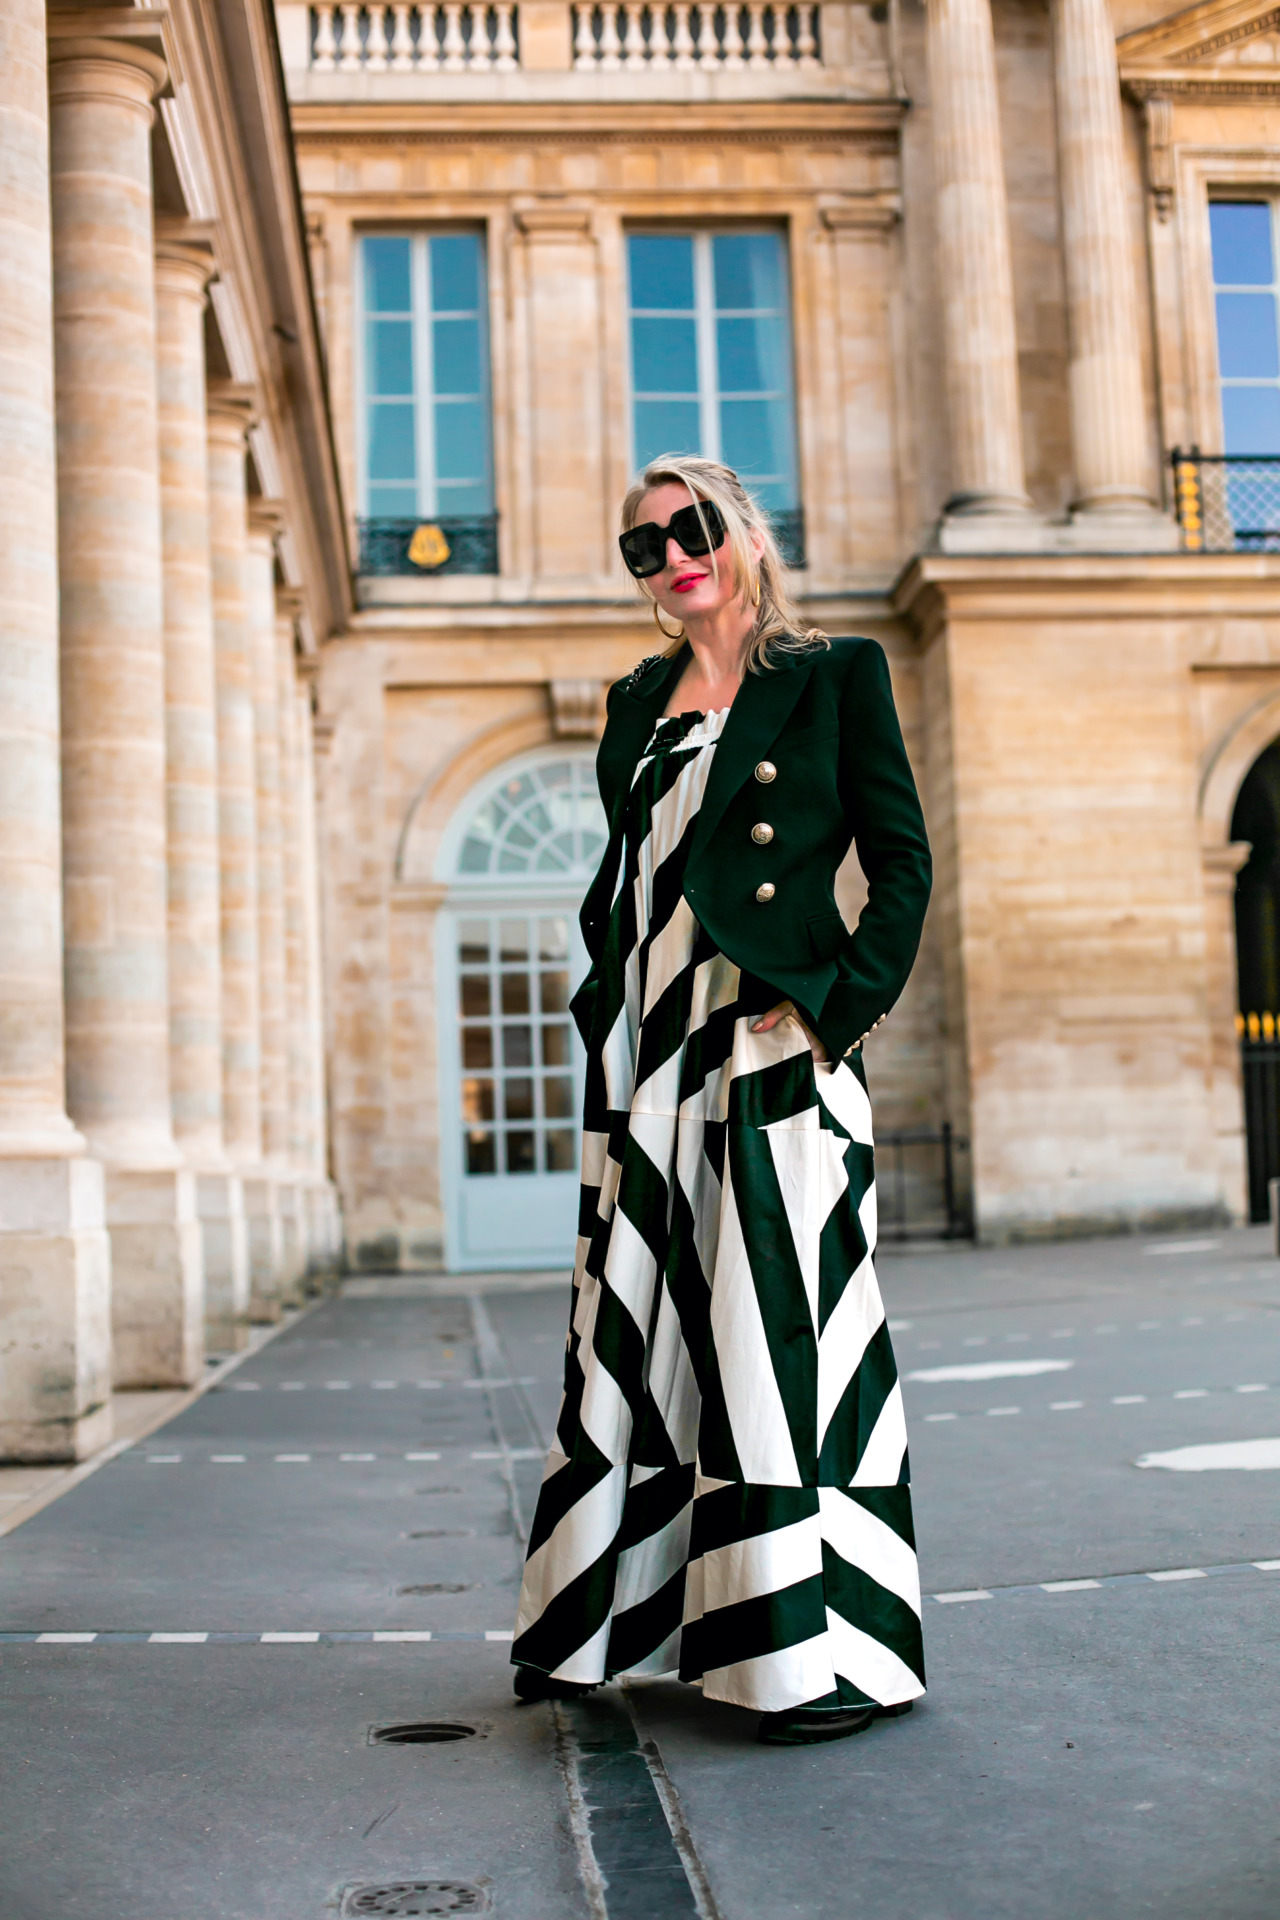 what to pack for paris, what to pack for paris fashion week, paris fashion week packing list, what I wore at paris fashion week, what I pack for a trip to paris, paris packing list, paris in febraury, erin busbee, busbee style, fashion over 40, paris, france, white and black striped tory burch maxi dress, see by chloe combat boots, gucci sunlgasses, chanel flap bag, black balmain blazer